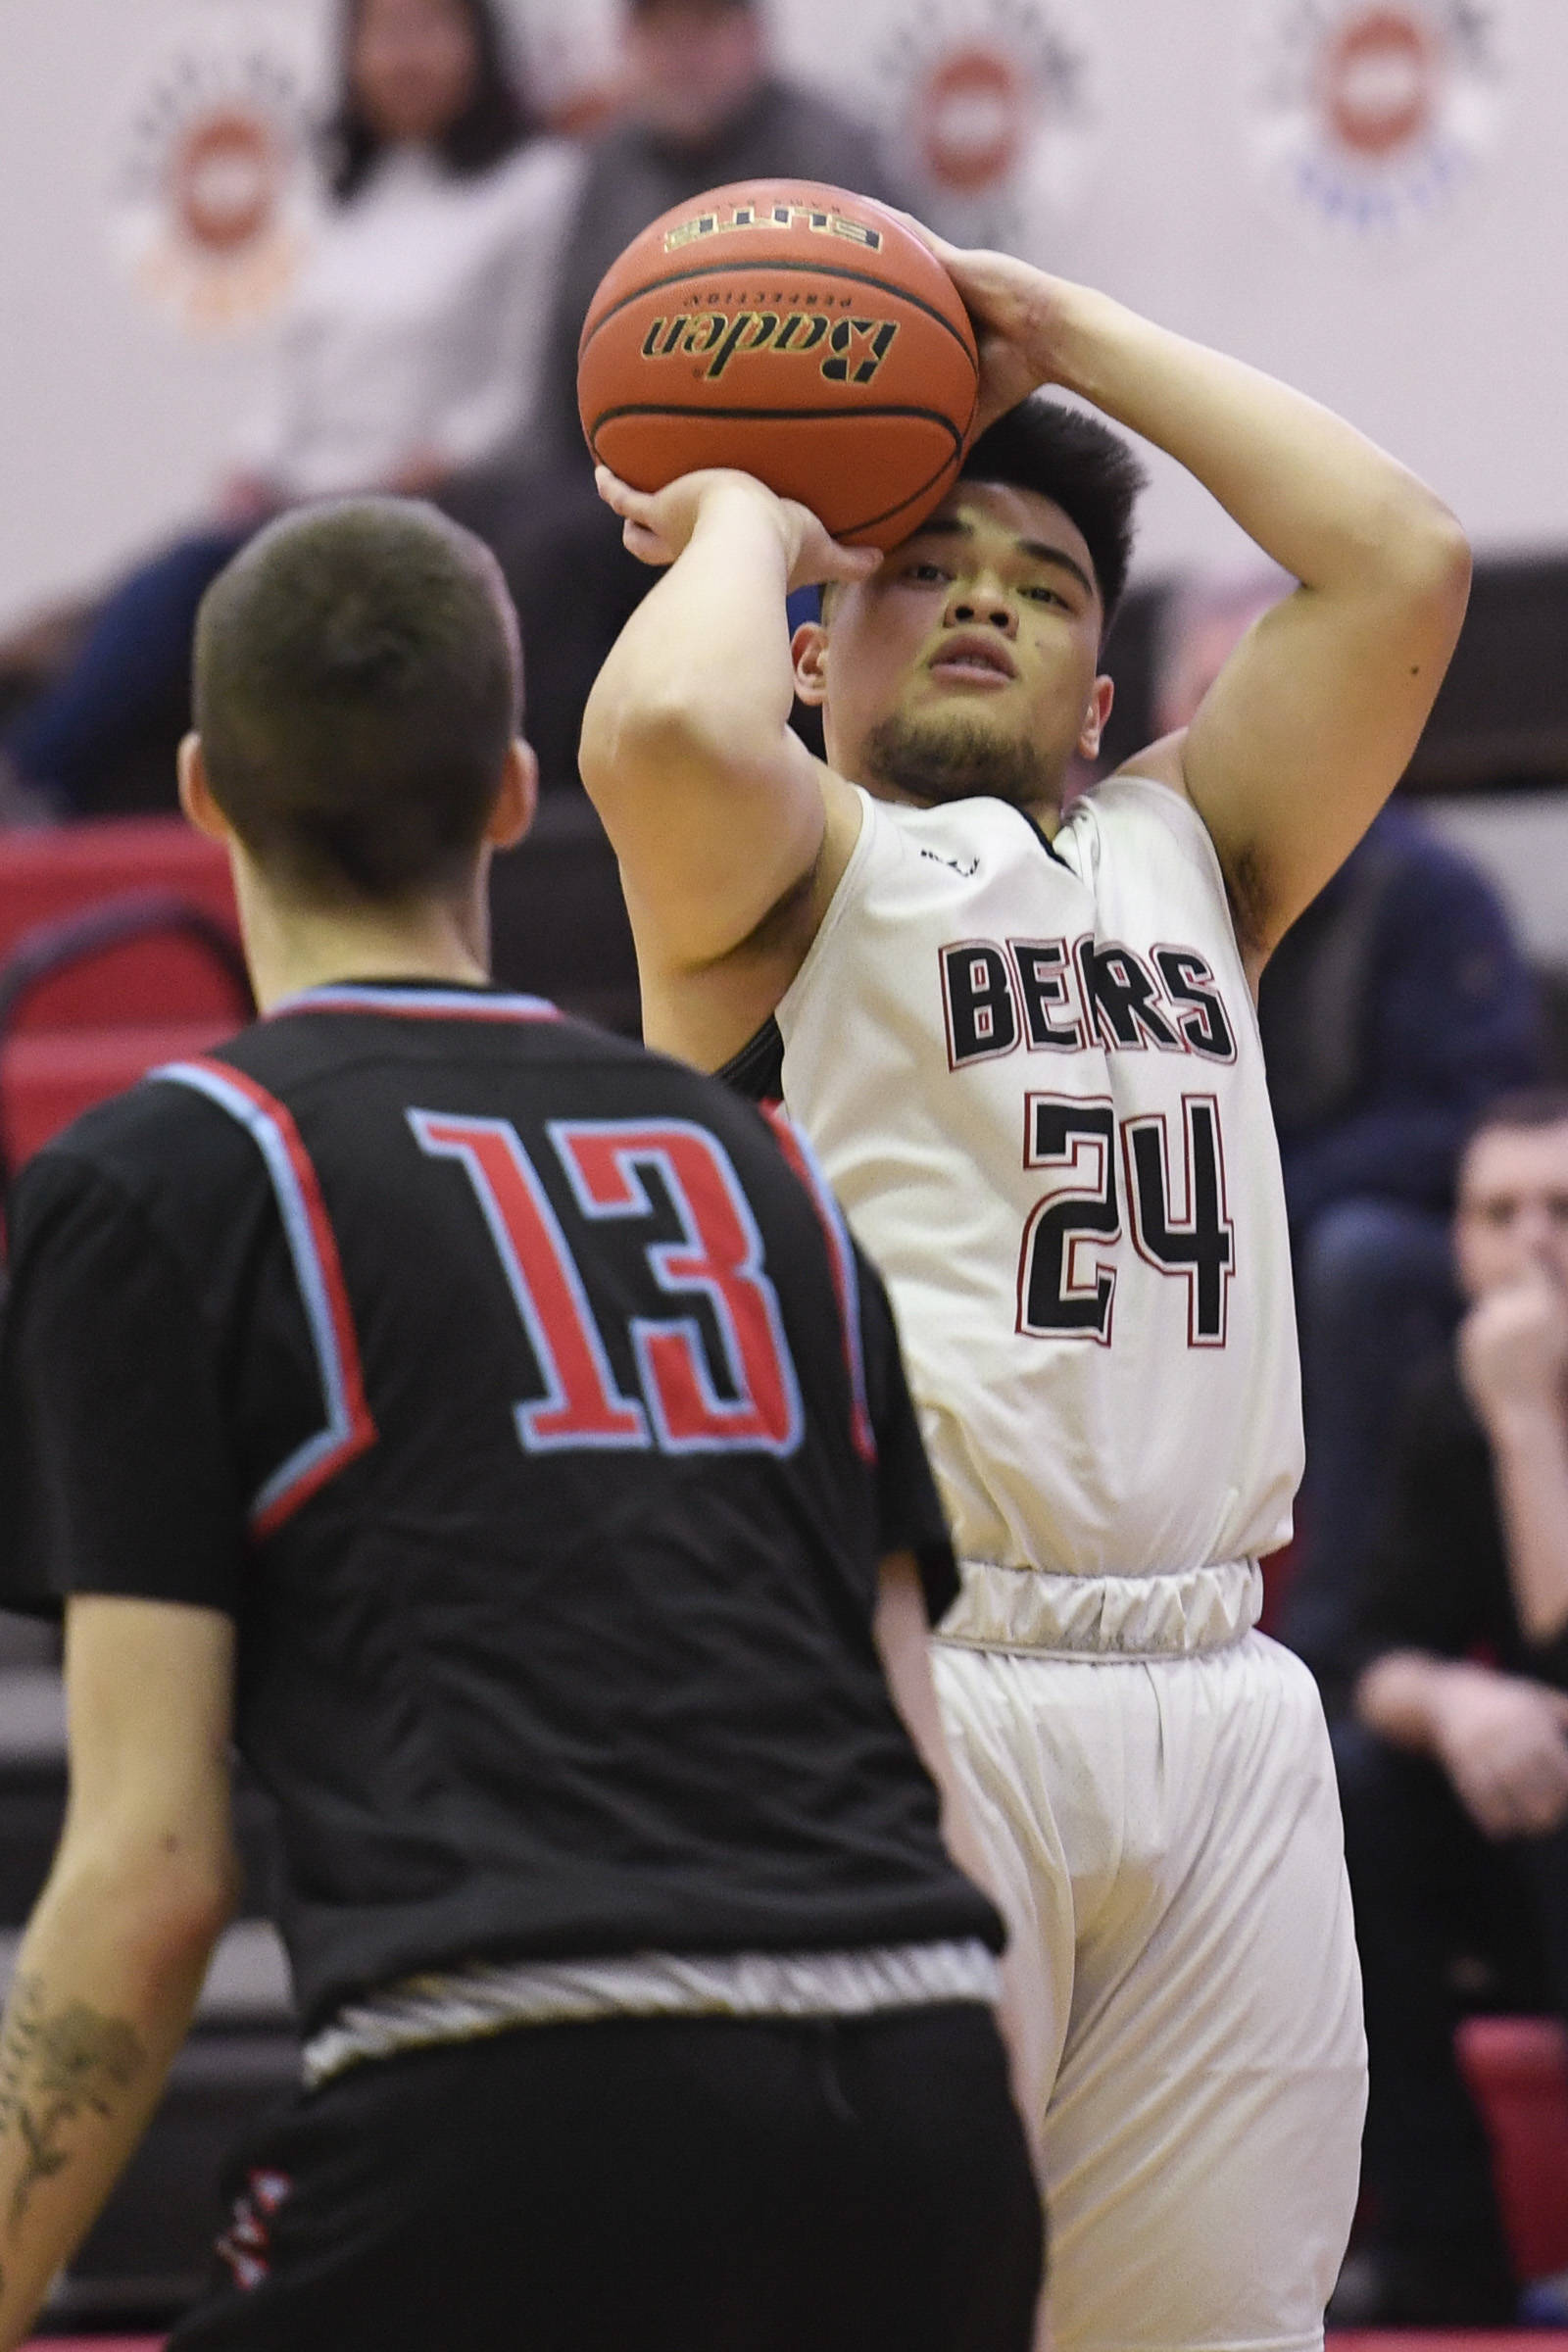 Juneau-Douglas’ Philip Gonzales shoots over East’s Andrew Graves at JDHS on Friday, Feb. 8, 2019. East won 66-54. (Michael Penn | Juneau Empire File)